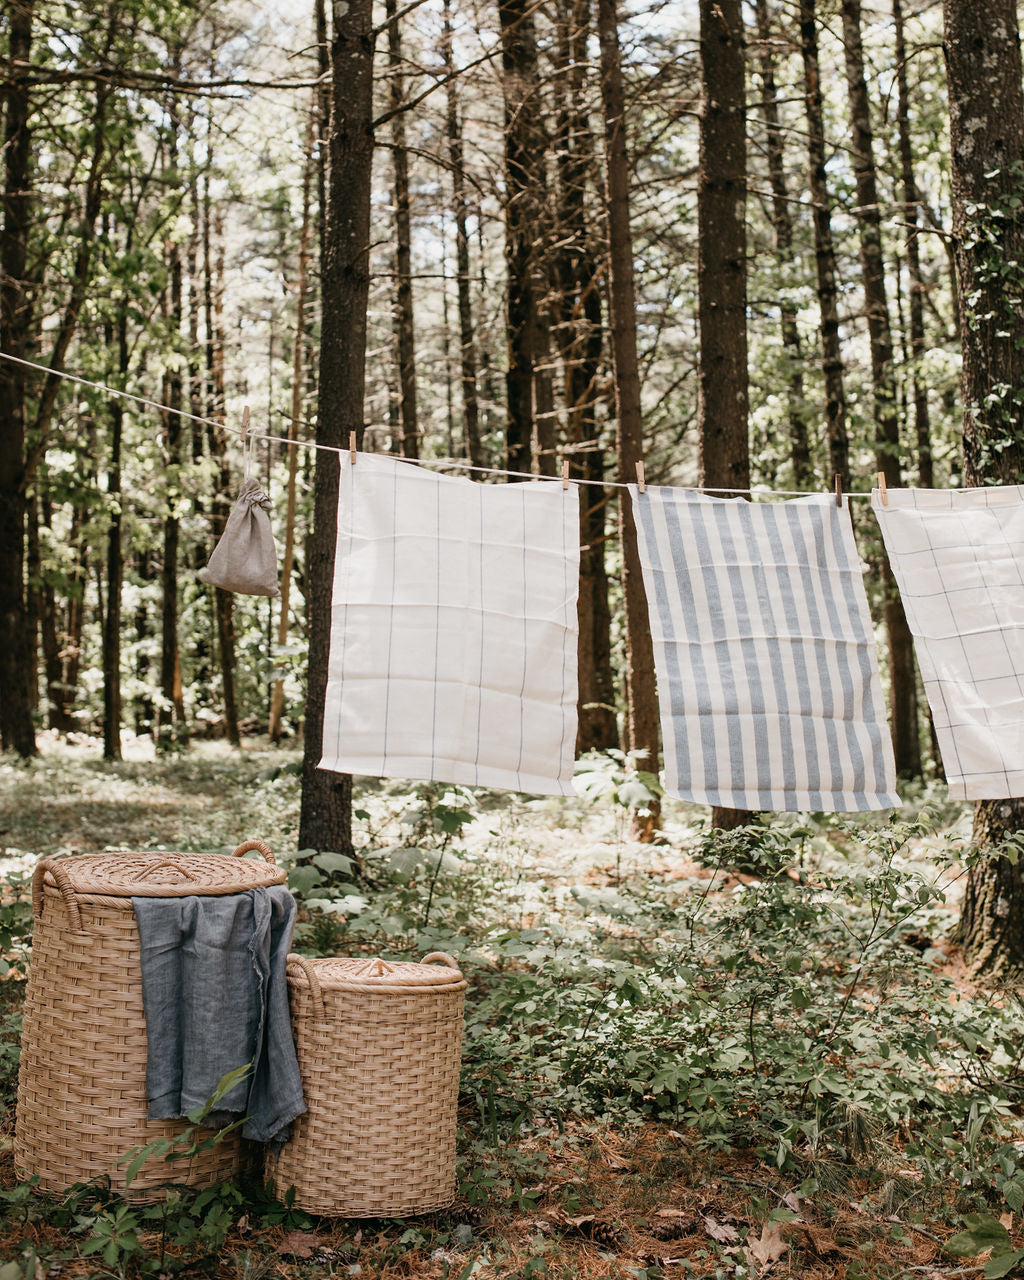 Laundry baskets under outdoor clothesline with wooden clothespins and linens drying